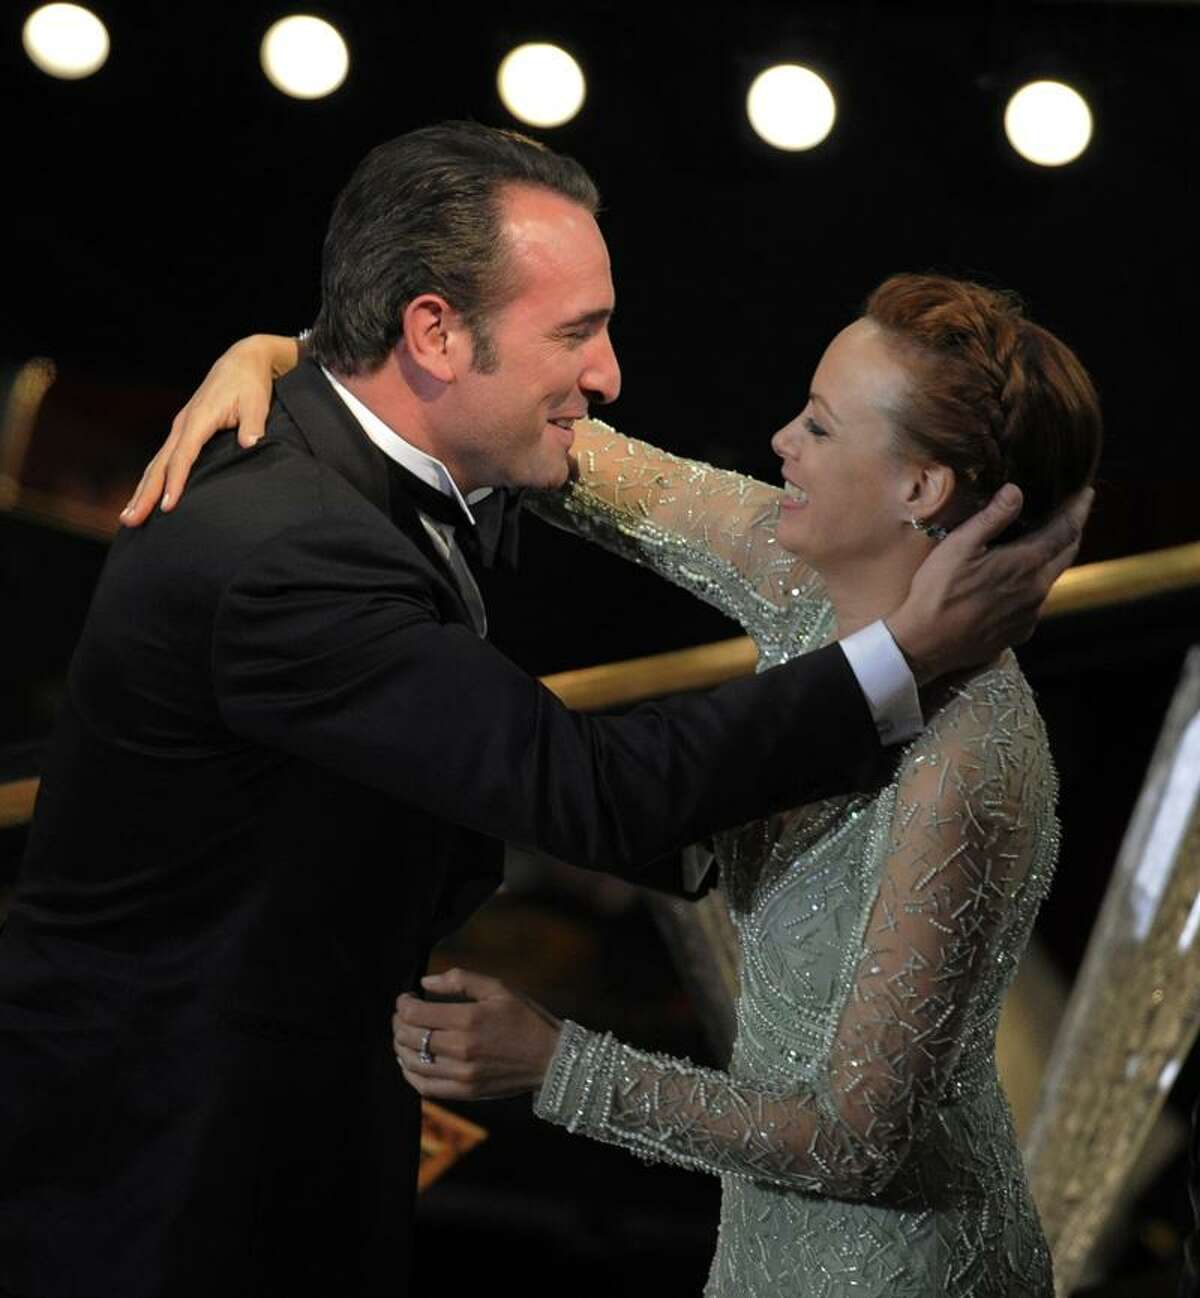 Jean Dujardin is congratulated by Berenice Bejo before accepting the Oscar for best actor in a leading role for "The Artist" during the 84th Academy Awards on Sunday in the Hollywood section of Los Angeles. Associated Press